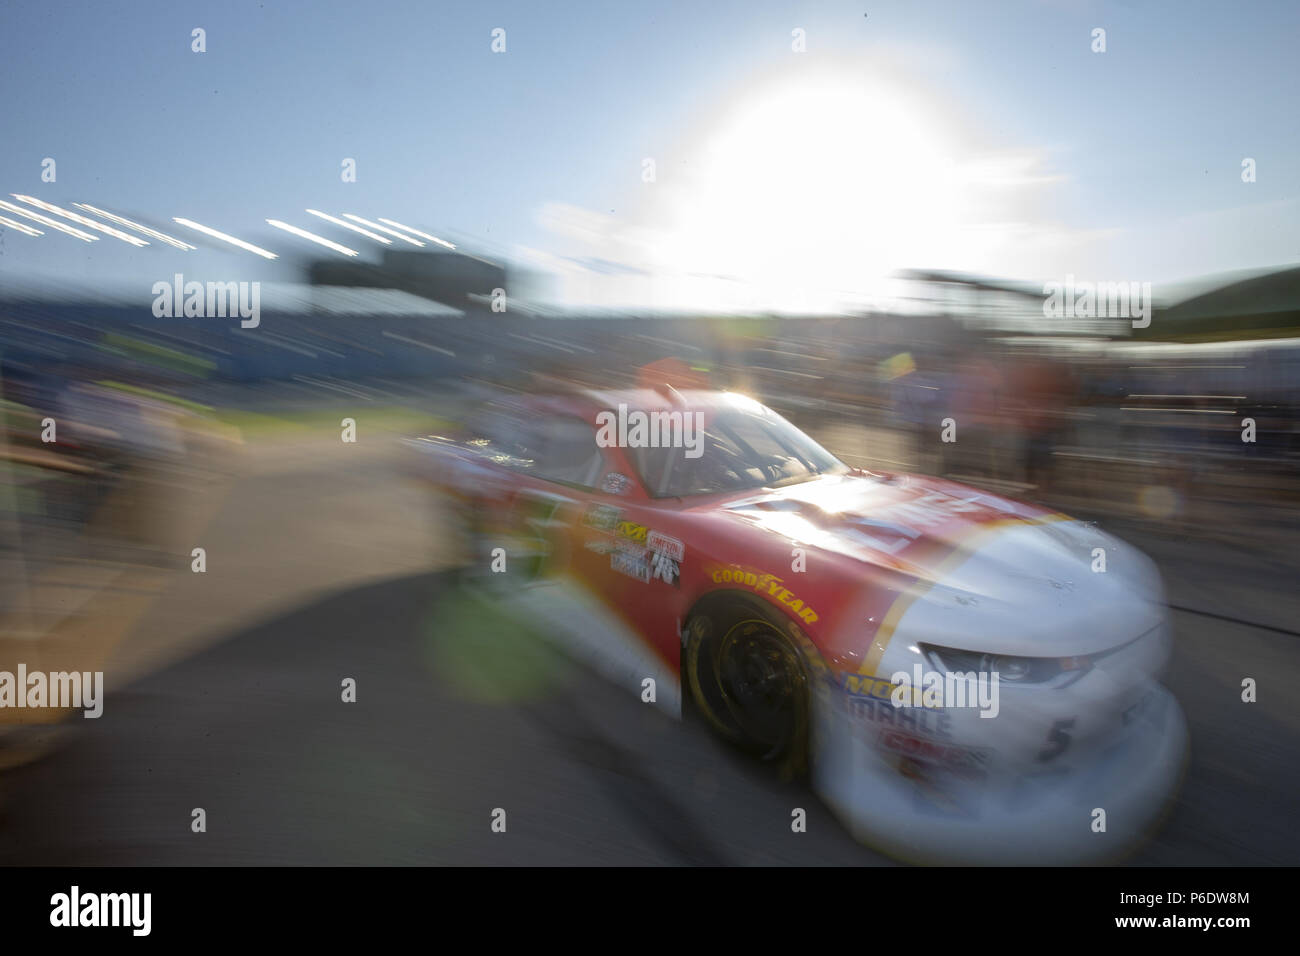 Joliet, Illinois, USA. 29th June, 2018. Michael Annett (5) gets ready to practice for the Overton's 300 at Chicagoland Speedway in Joliet, Illinois. Credit: Stephen A. Arce/ASP/ZUMA Wire/Alamy Live News Stock Photo